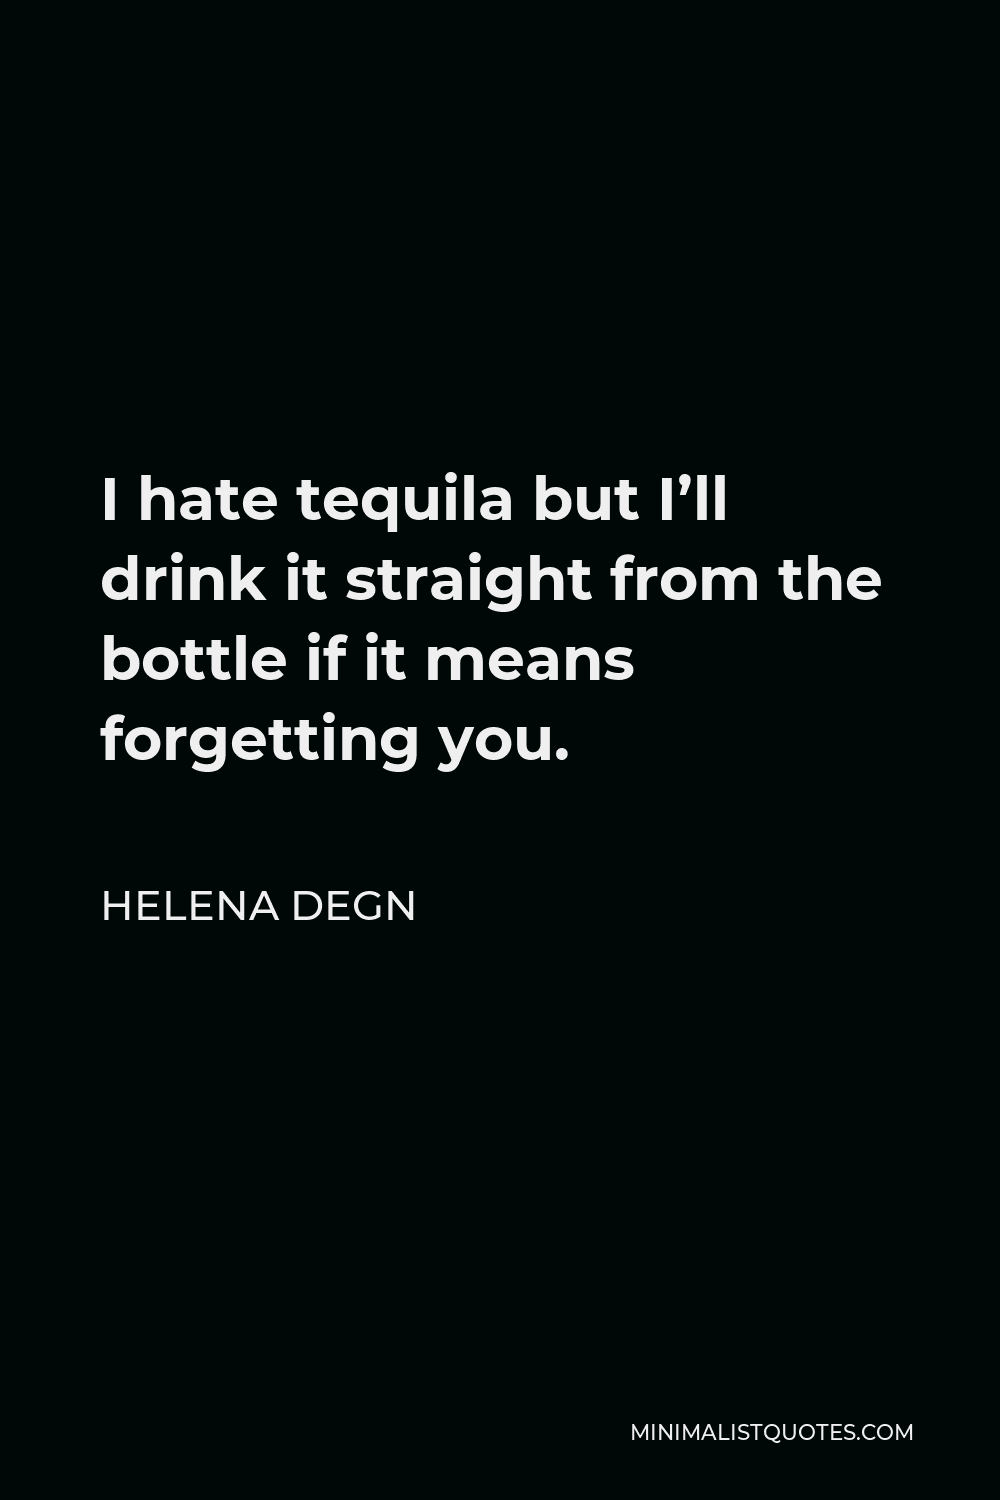 Helena Degn Quote - I hate tequila but I’ll drink it straight from the bottle if it means forgetting you.